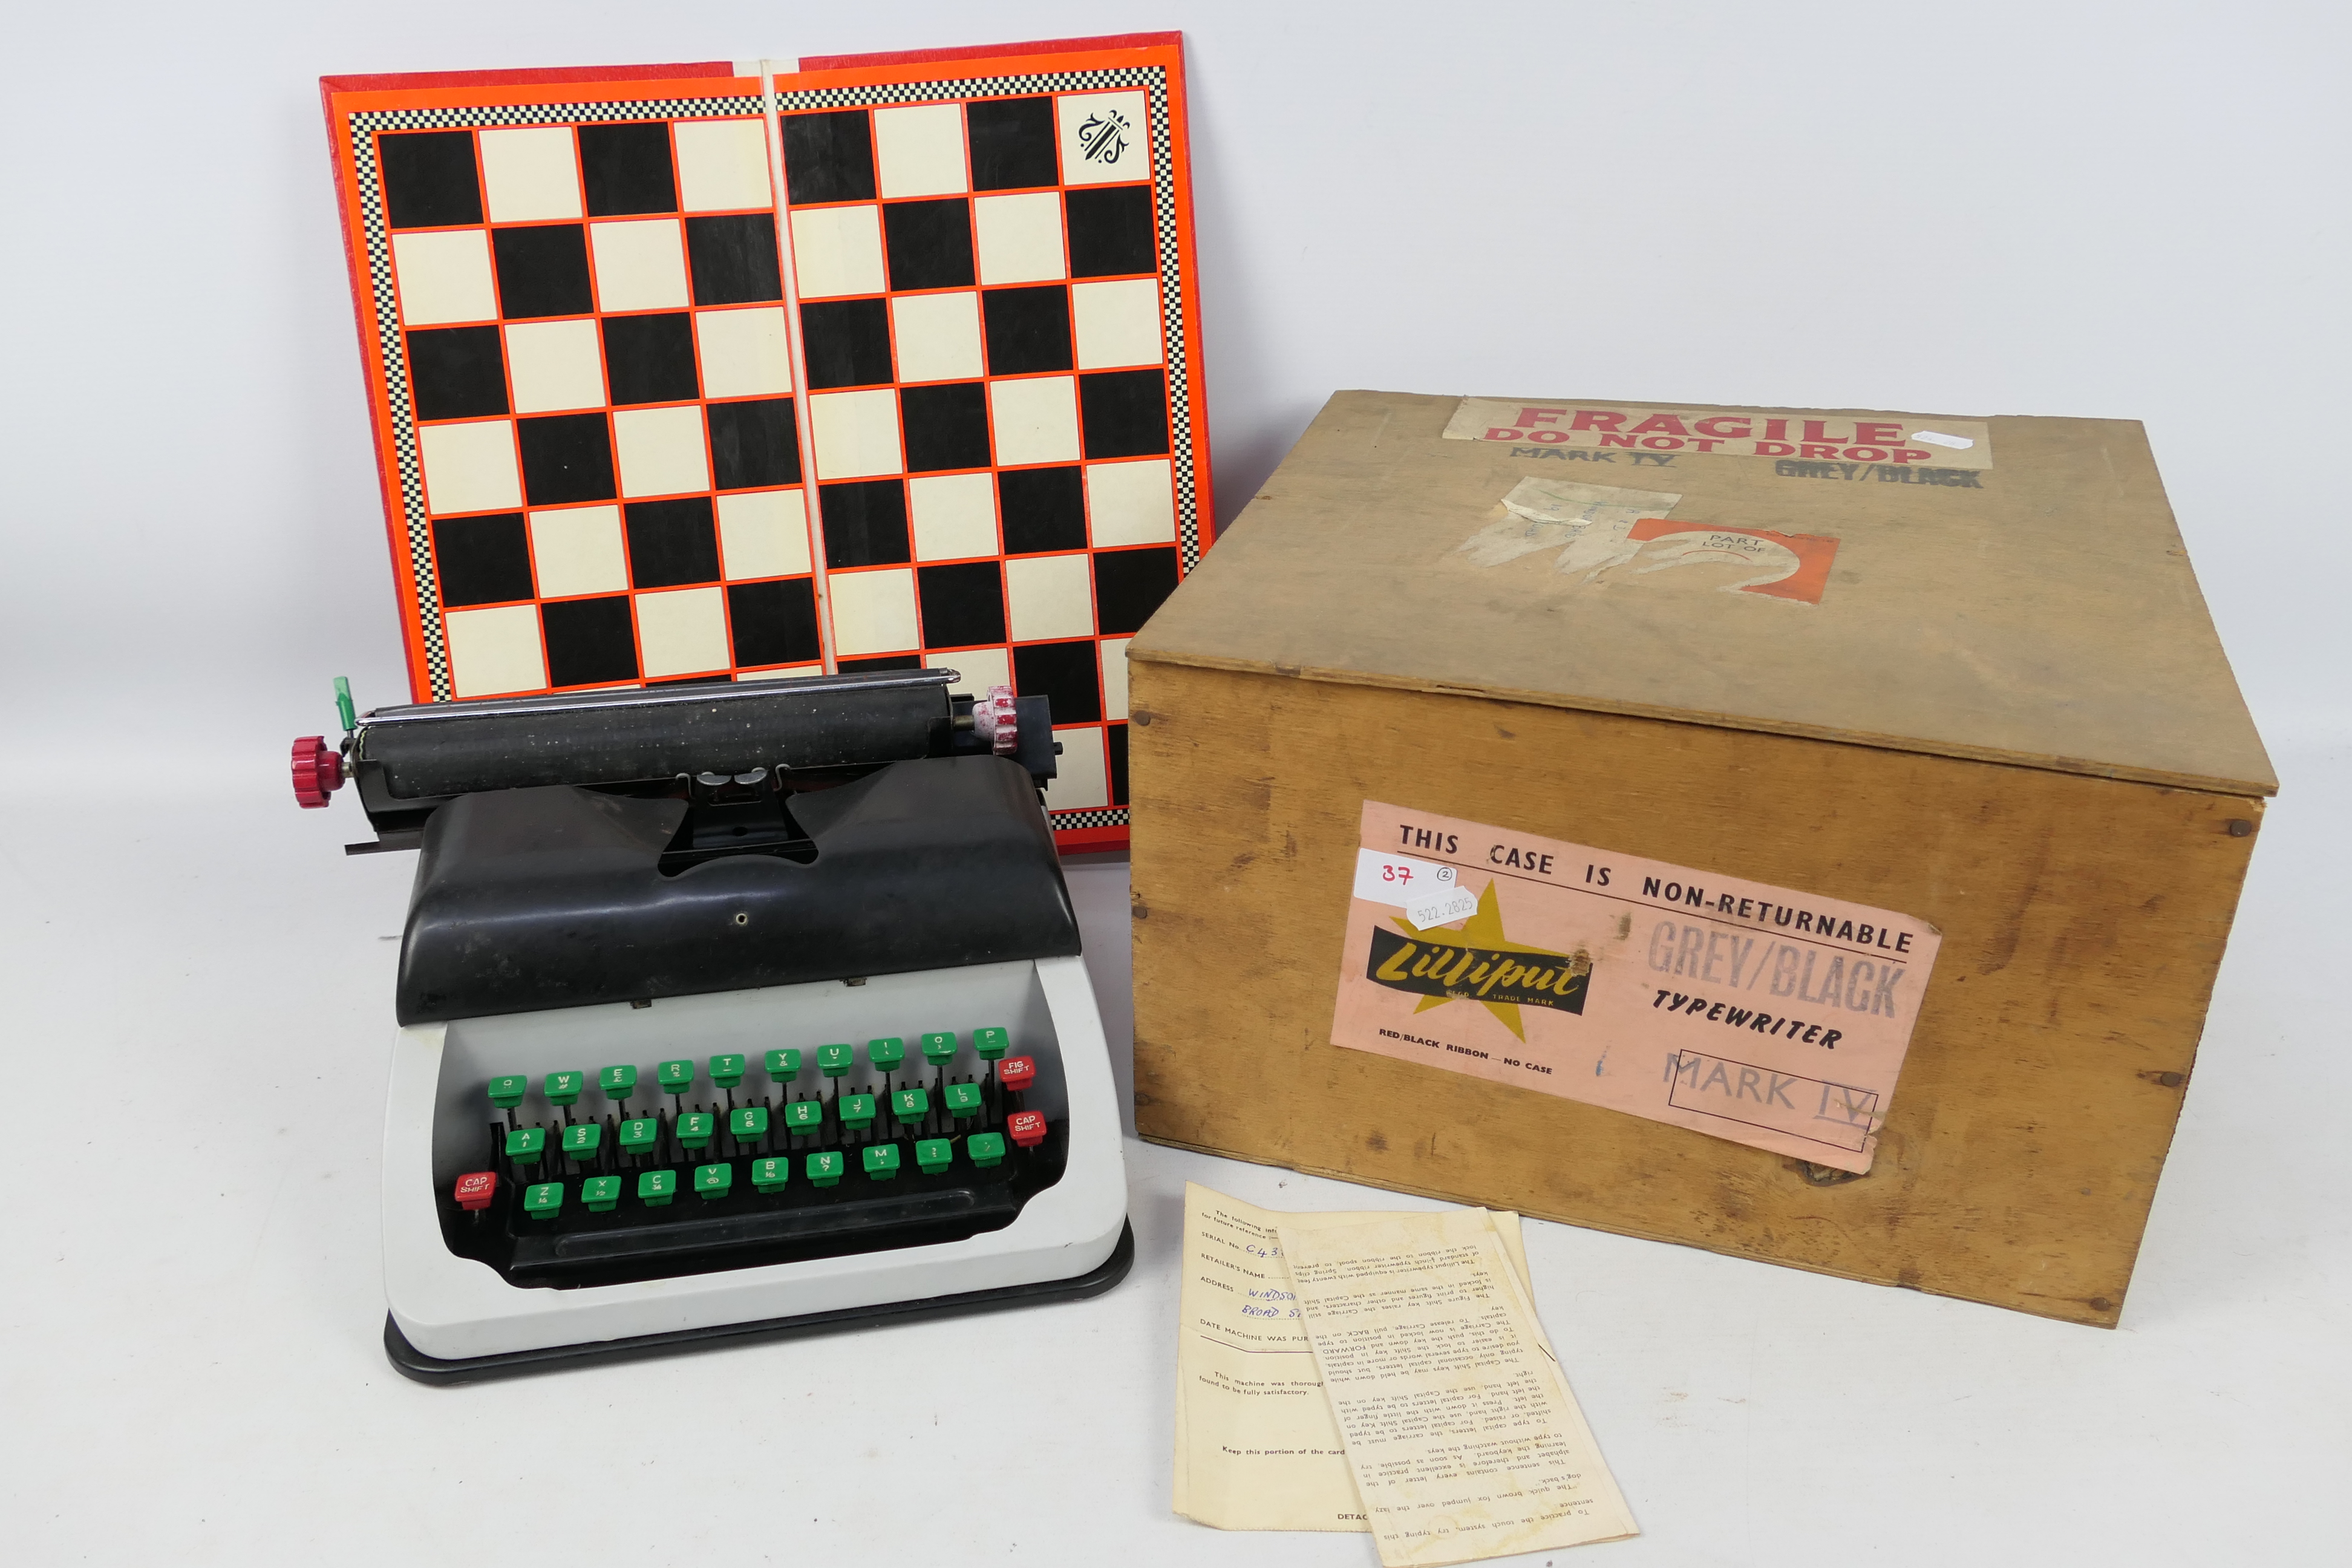 A Lilliput Mark IV typewriter contained in shipping crate and a folding chess board.